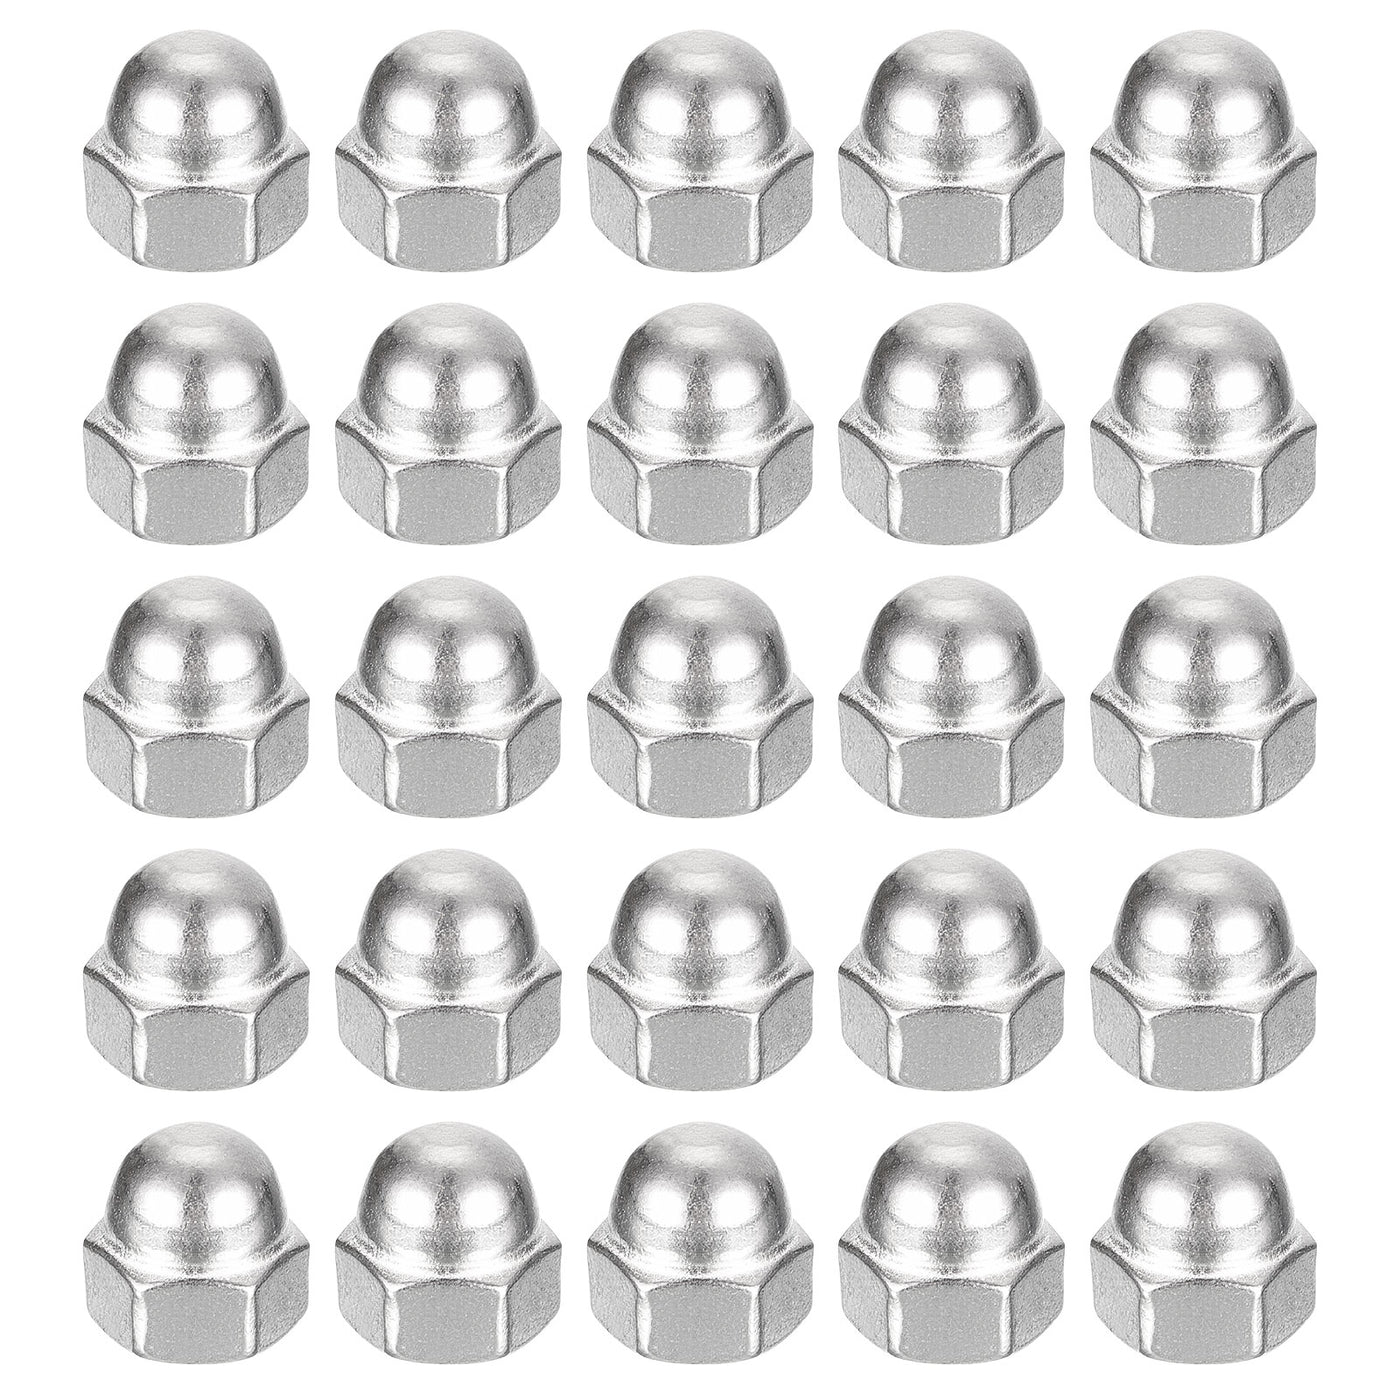 uxcell Uxcell #10-32 Acorn Cap Nuts,50pcs - 304 Stainless Steel Hardware Nuts, Acorn Hex Cap Dome Head Nuts for Fasteners (Silver)